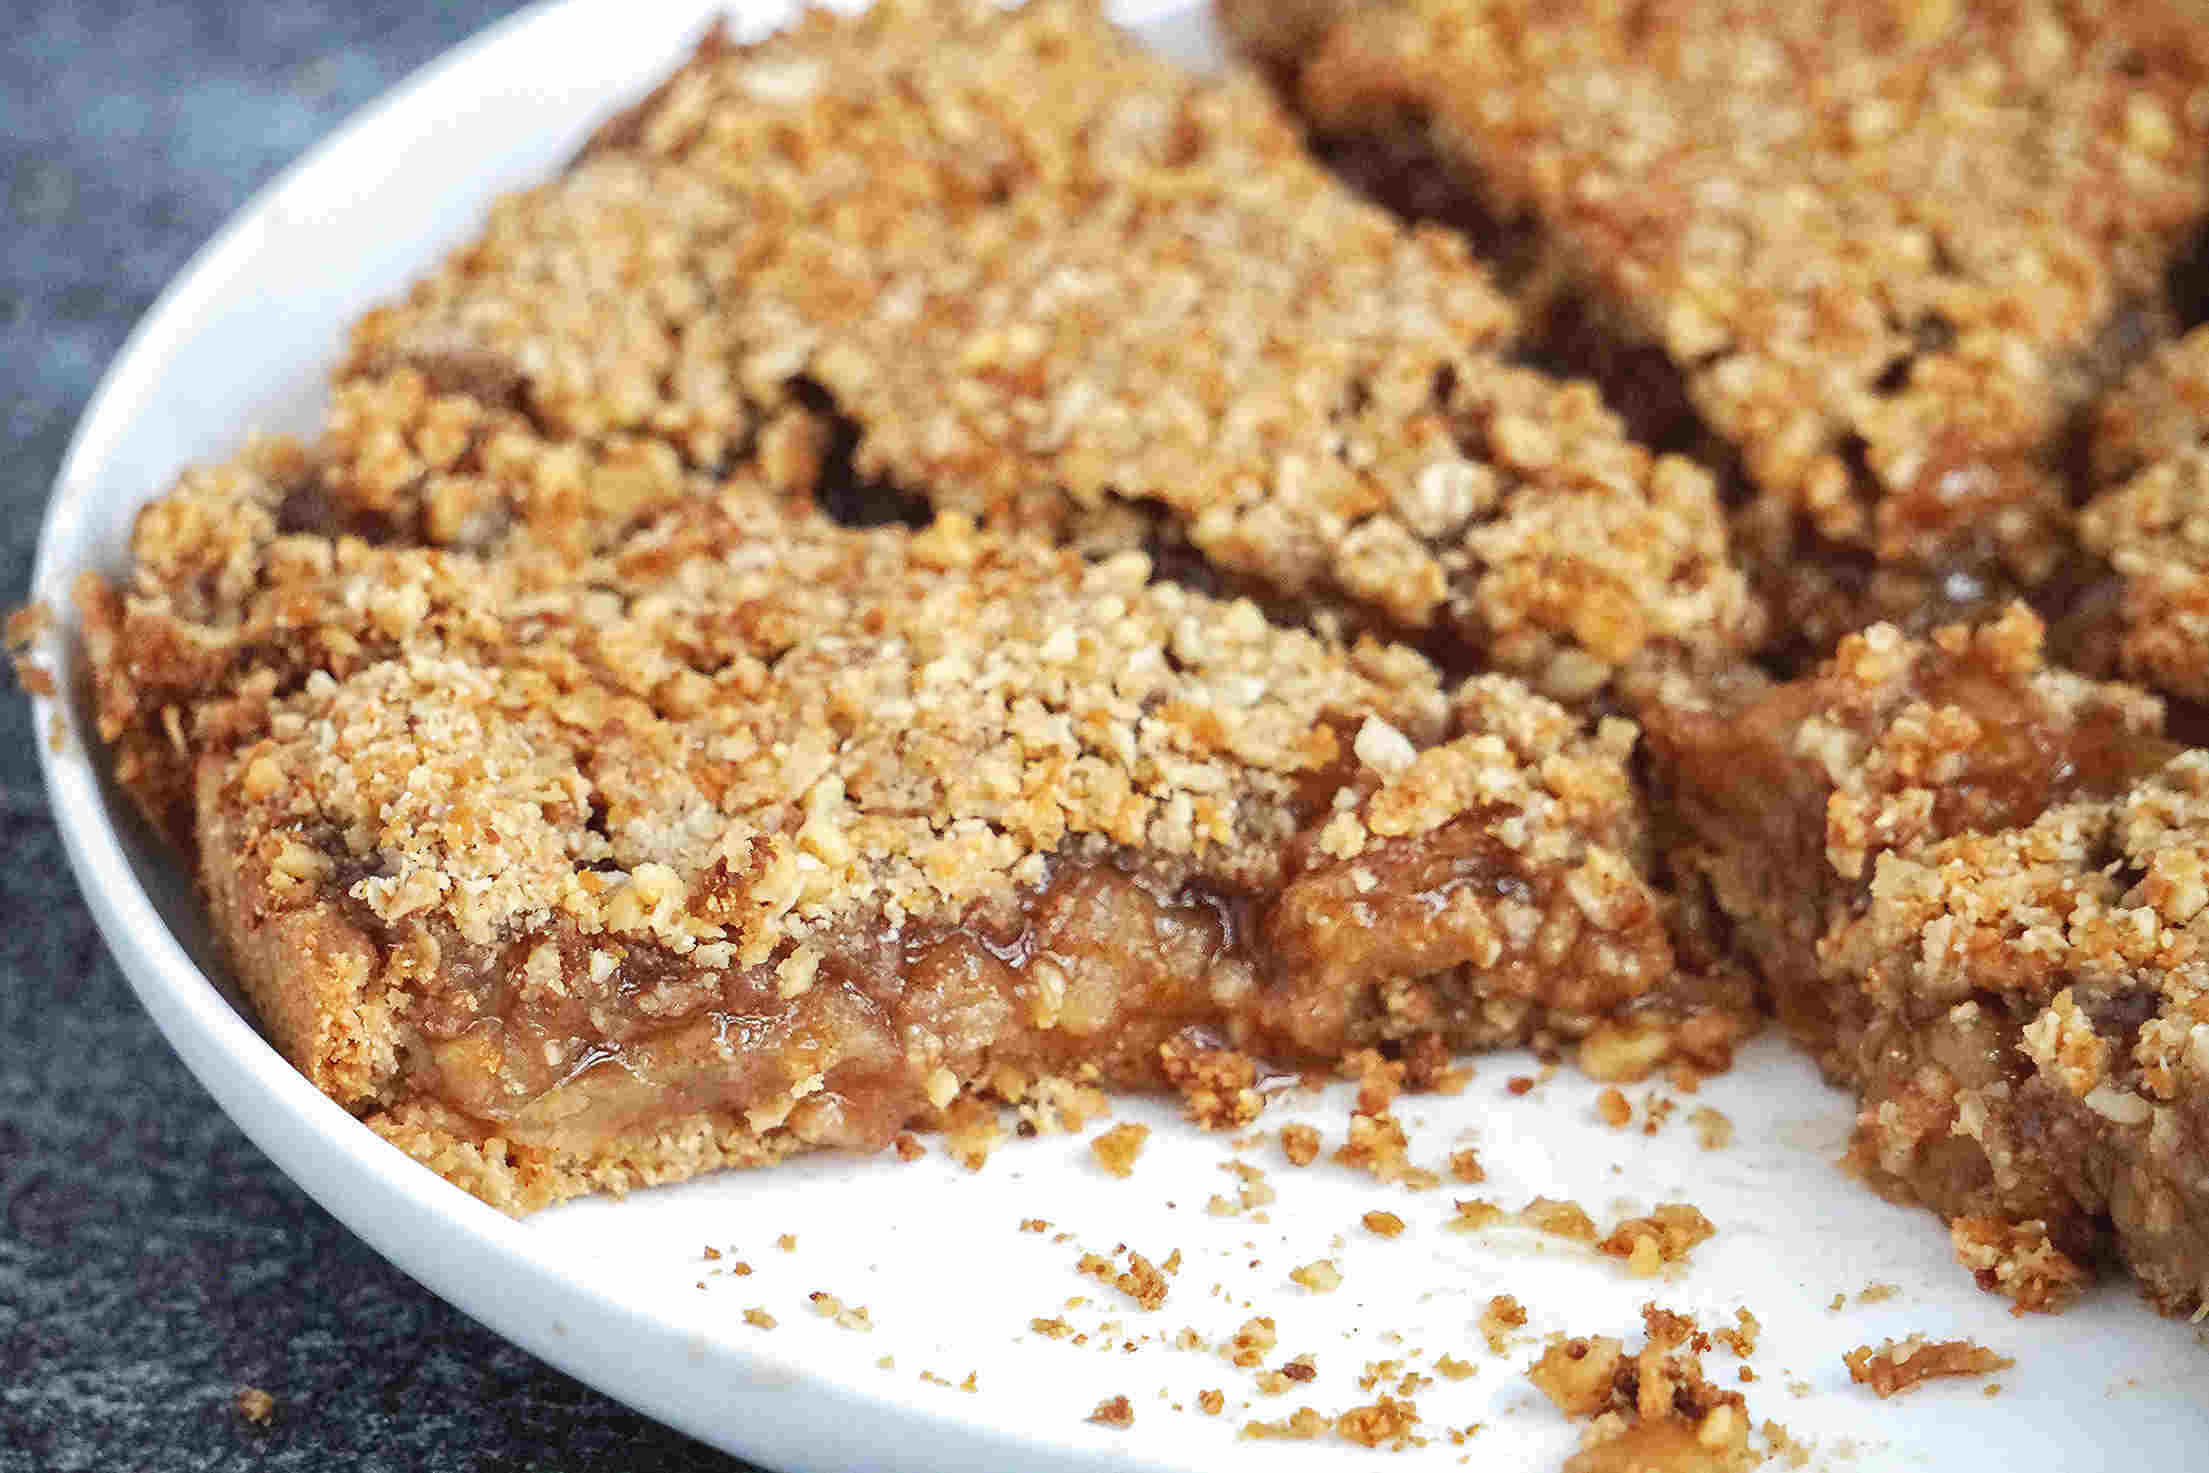 Vegan Gluten Free Apple Pie With Crumble Topping (Dairy free).